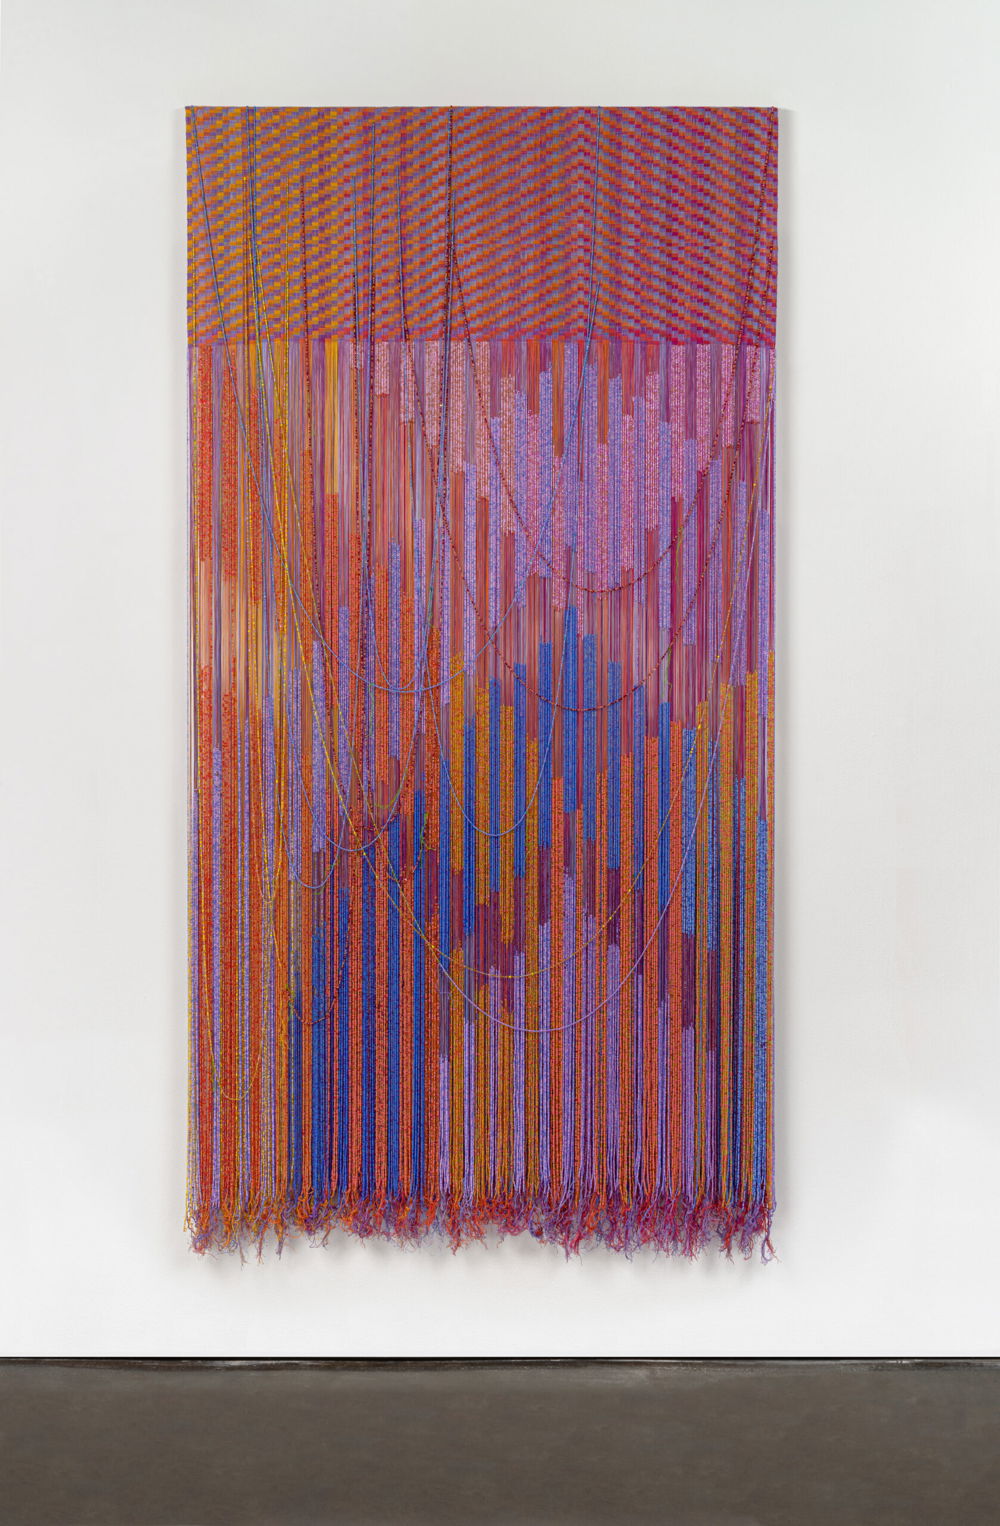 A vertical rectangular-shaped tapestry. The top quarter of the composition is a completed tapestry composed of geometric patterning in iridescent reds, oranges, and blues. The bottom three quarters of the composition are unwoven with intricately beaded strands of thread that create a vibrating pattern of intersecting chevrons in saturated reds, oranges, pinks, purples, and blues. A few loose strands are wisped upward creating thin U-shaped lines.